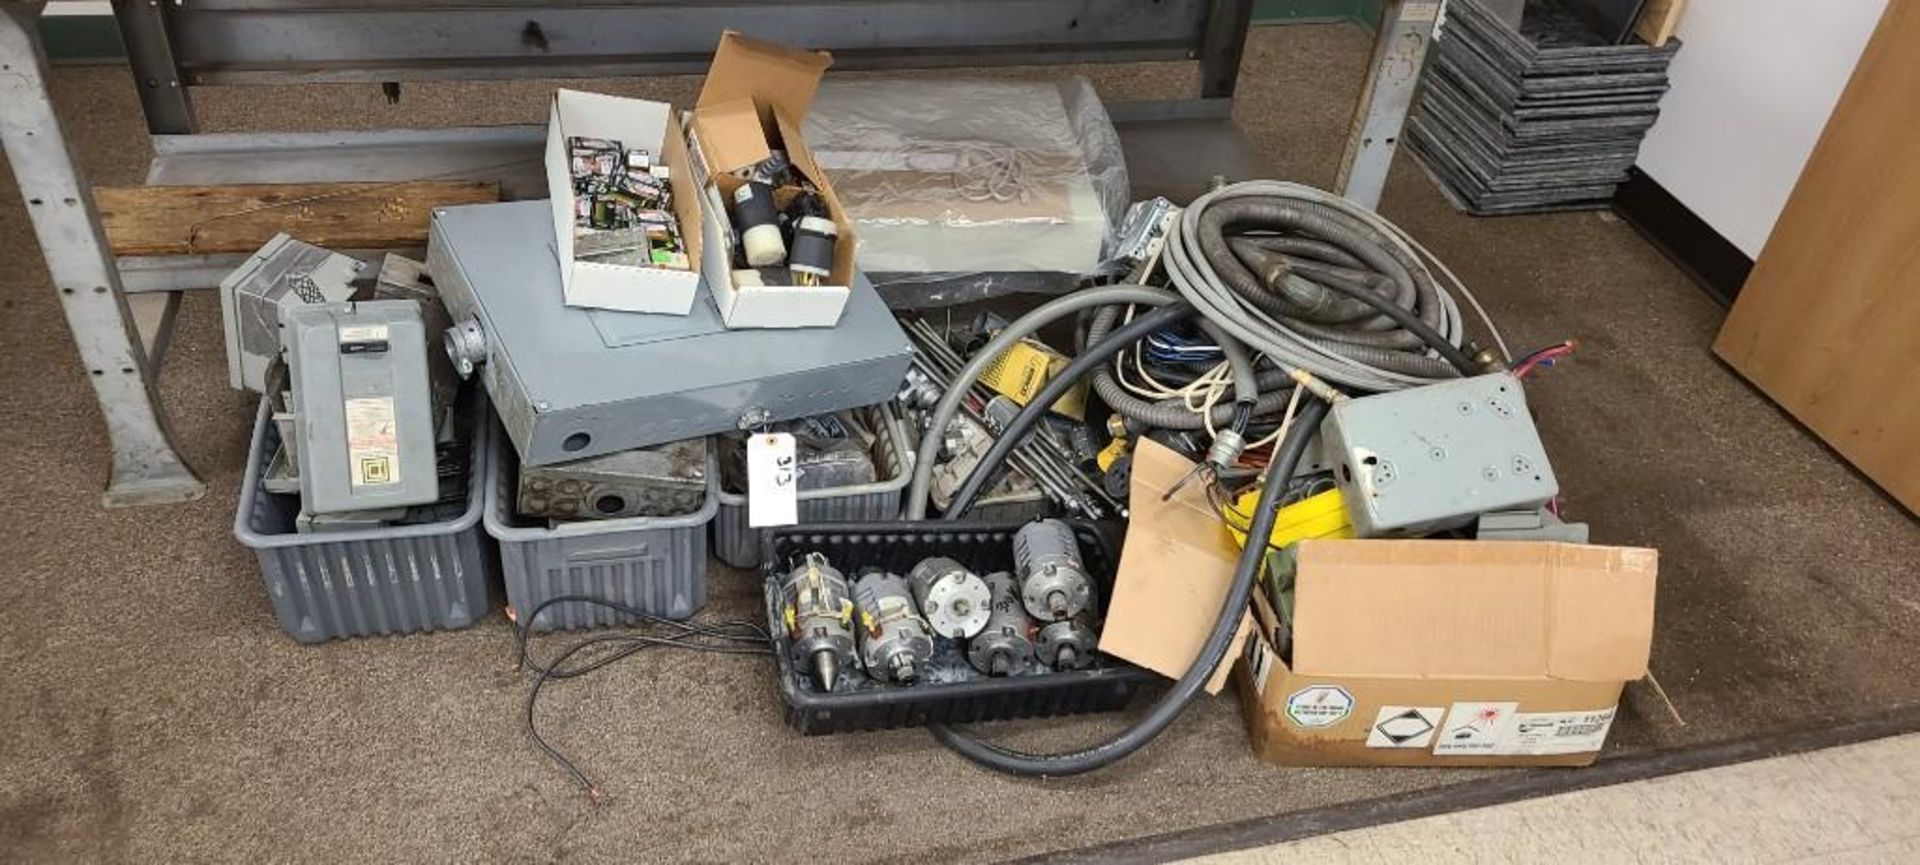 ASSORTED ELECTRICAL COMPONENTS, DISCONNECT BOXES - Image 2 of 2